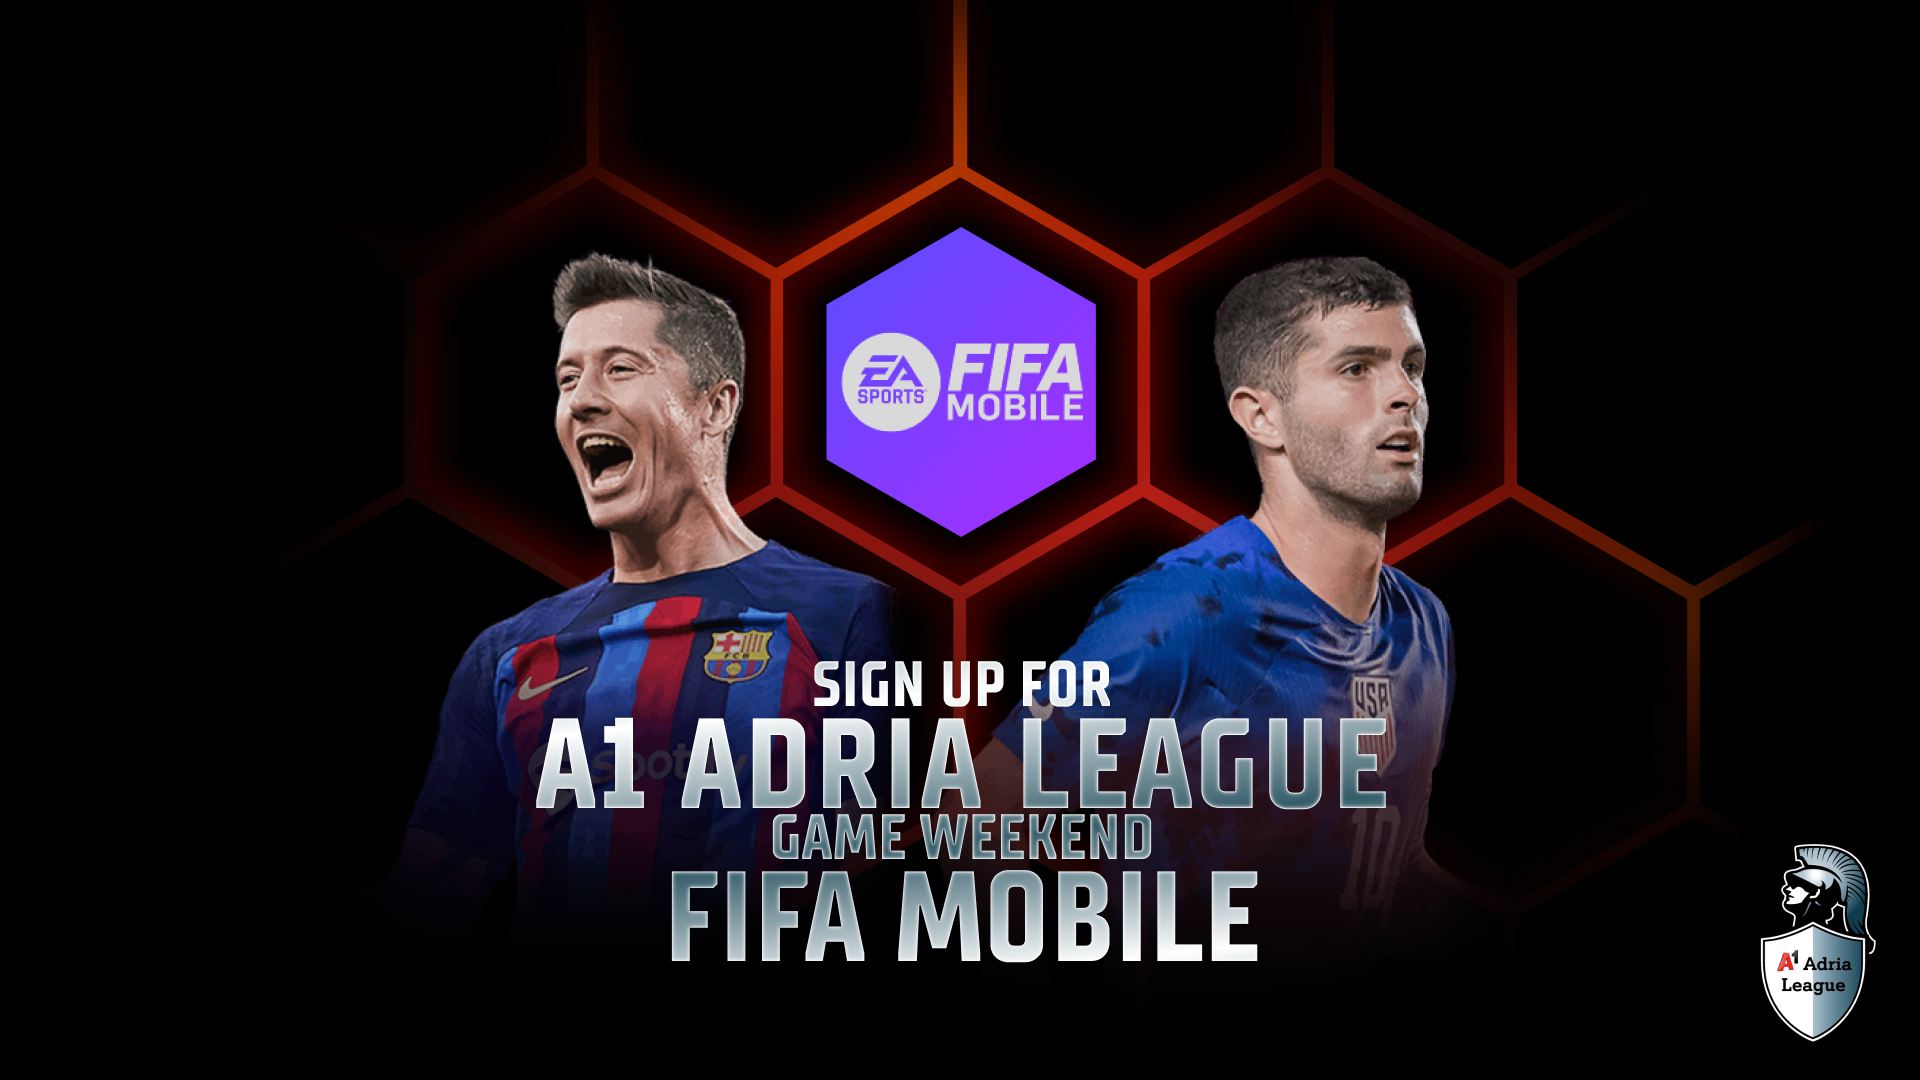 FIFA Mobile is coming to A1AL for the first time ever! » A1 Adria League